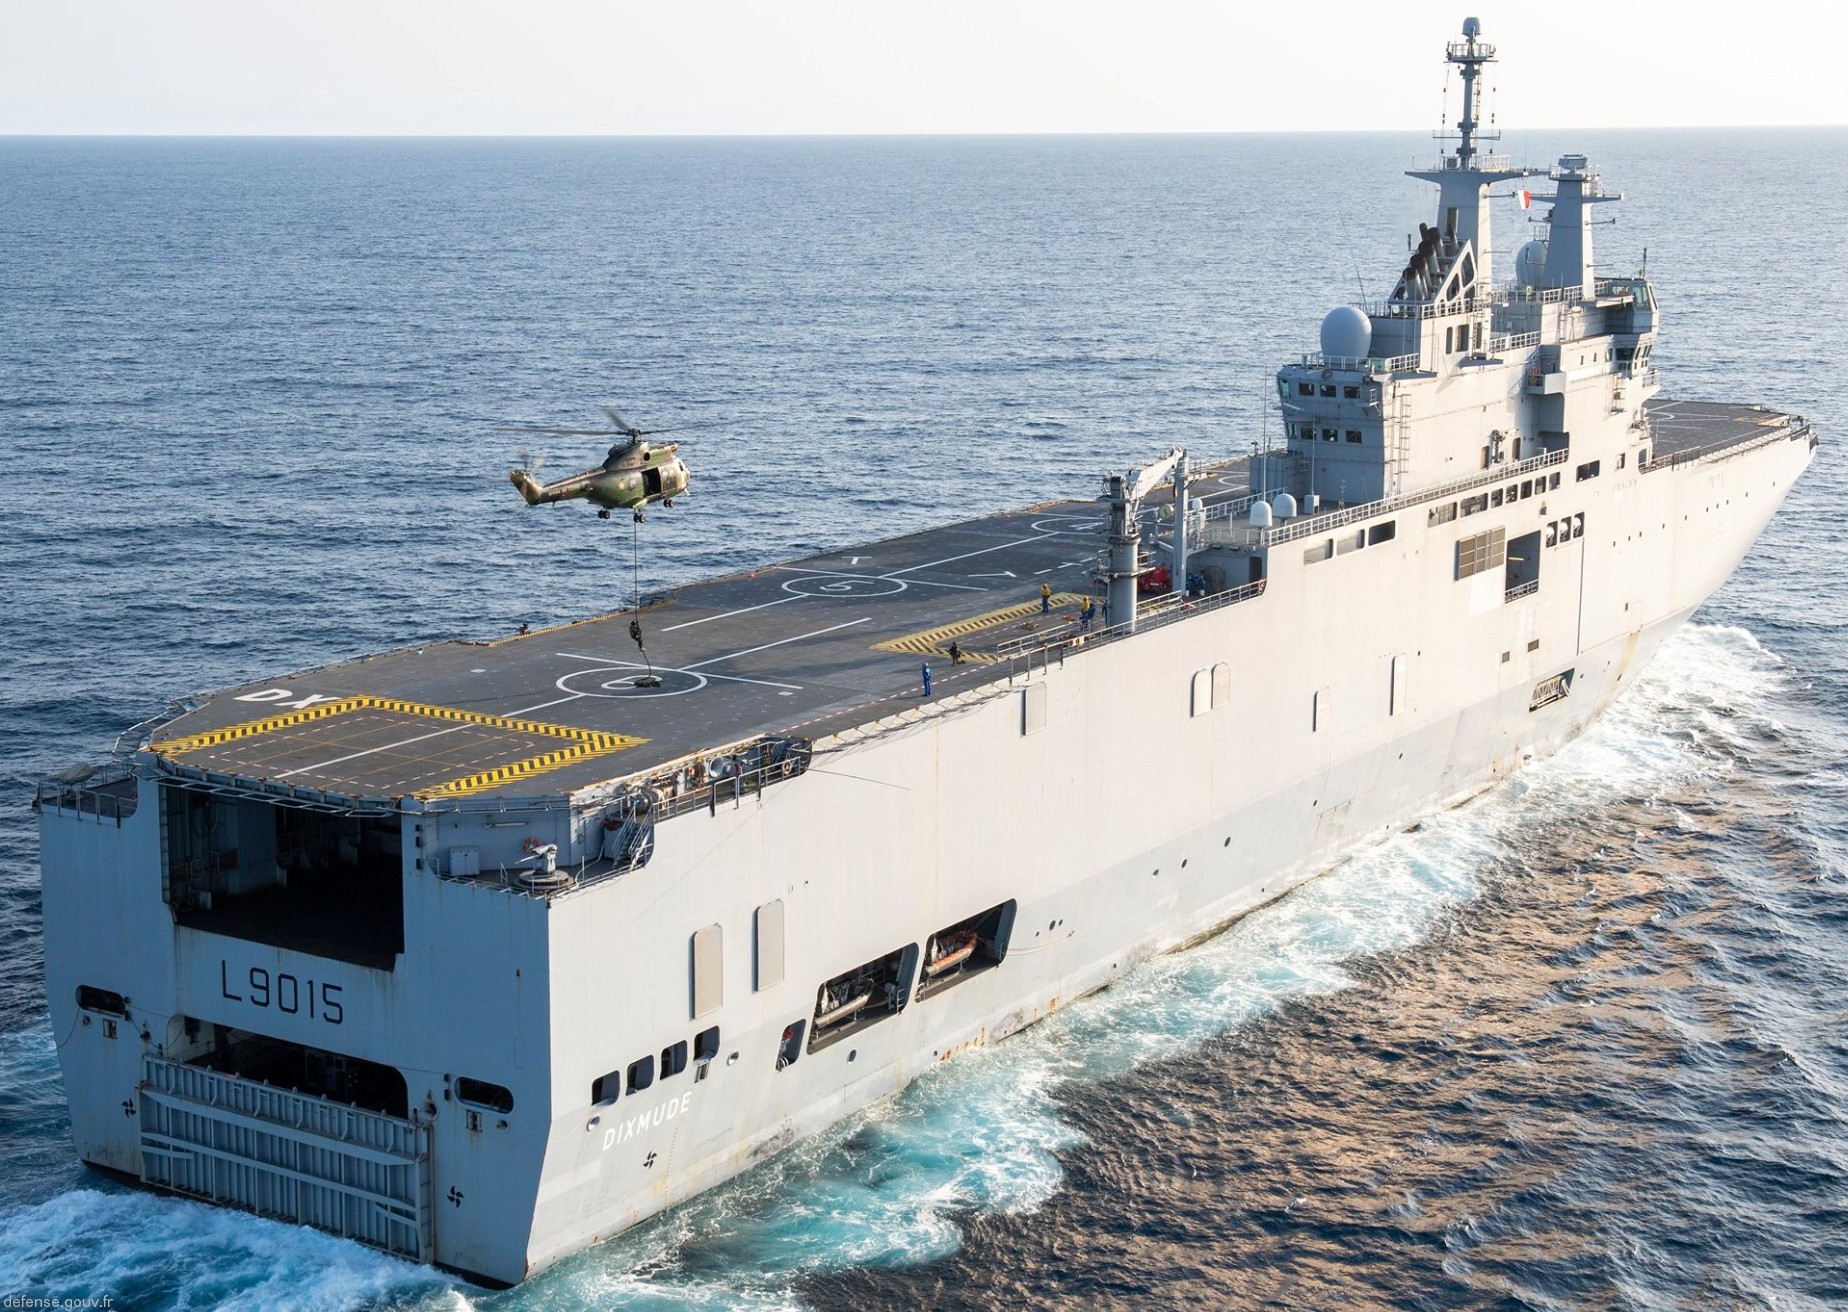 l-9015 fs dixmude mistral class amphibious assault command ship bpc french navy marine nationale 58